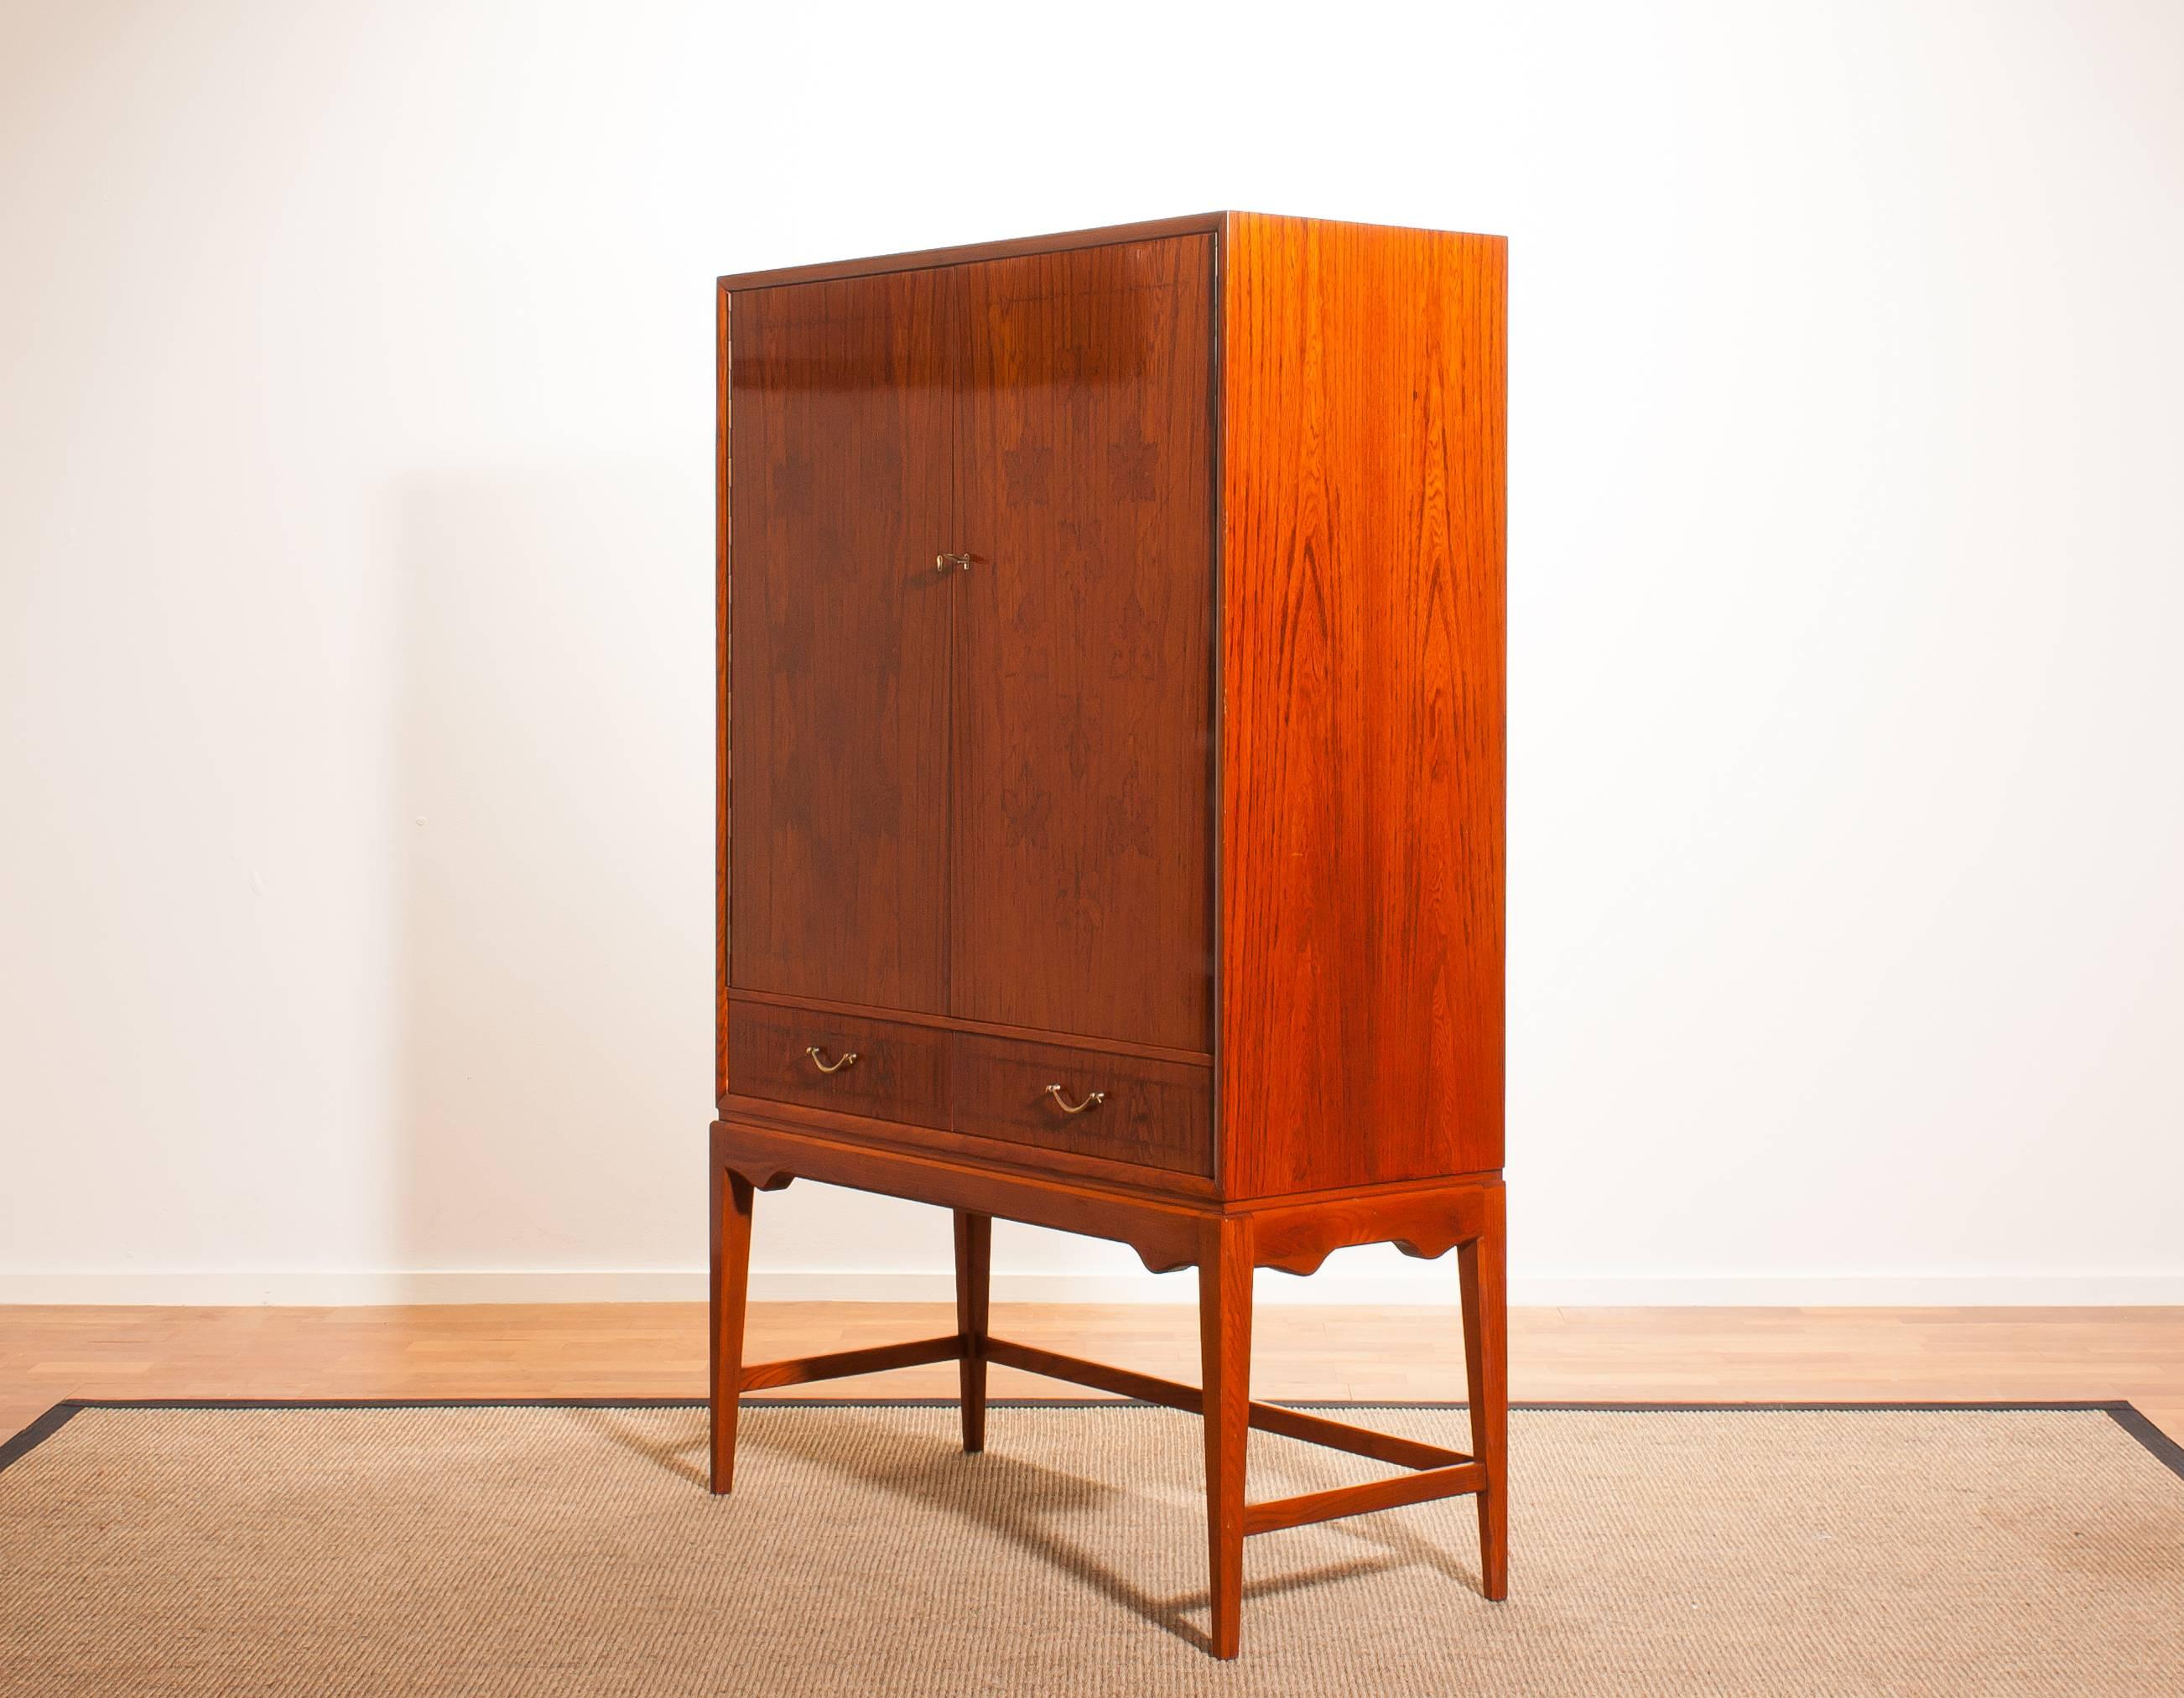 Wonderful bar or cocktail cabinet by Ferdinand Lundquist.
It is made of chestnut with beautiful leafs inlaid veneer.
This cabinet is in a beautiful condition.
Period 1940s
Dimensions: H 147 cm, W 94 cm, D 40 cm.